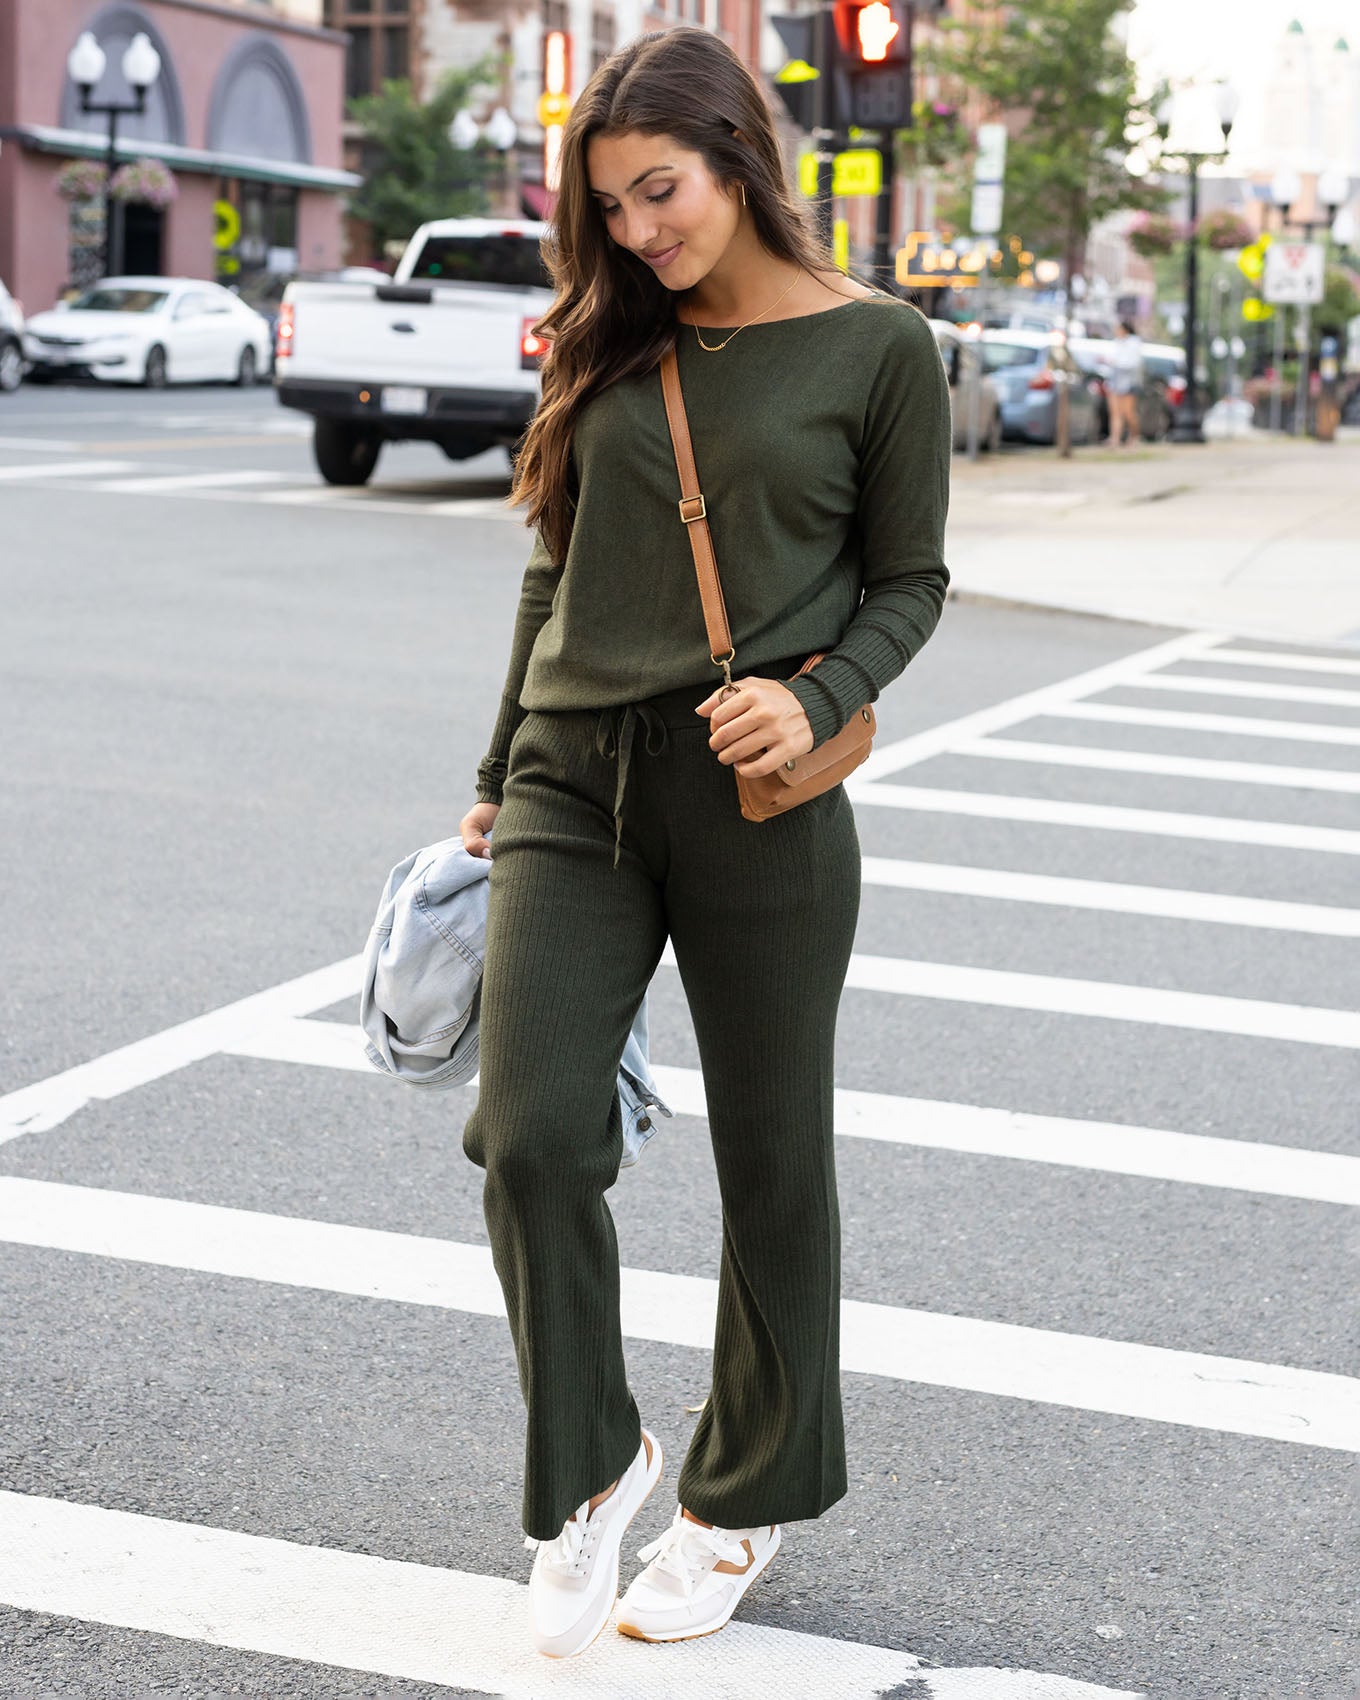 VISCOSE KNIT TROUSERS IN OLIVE